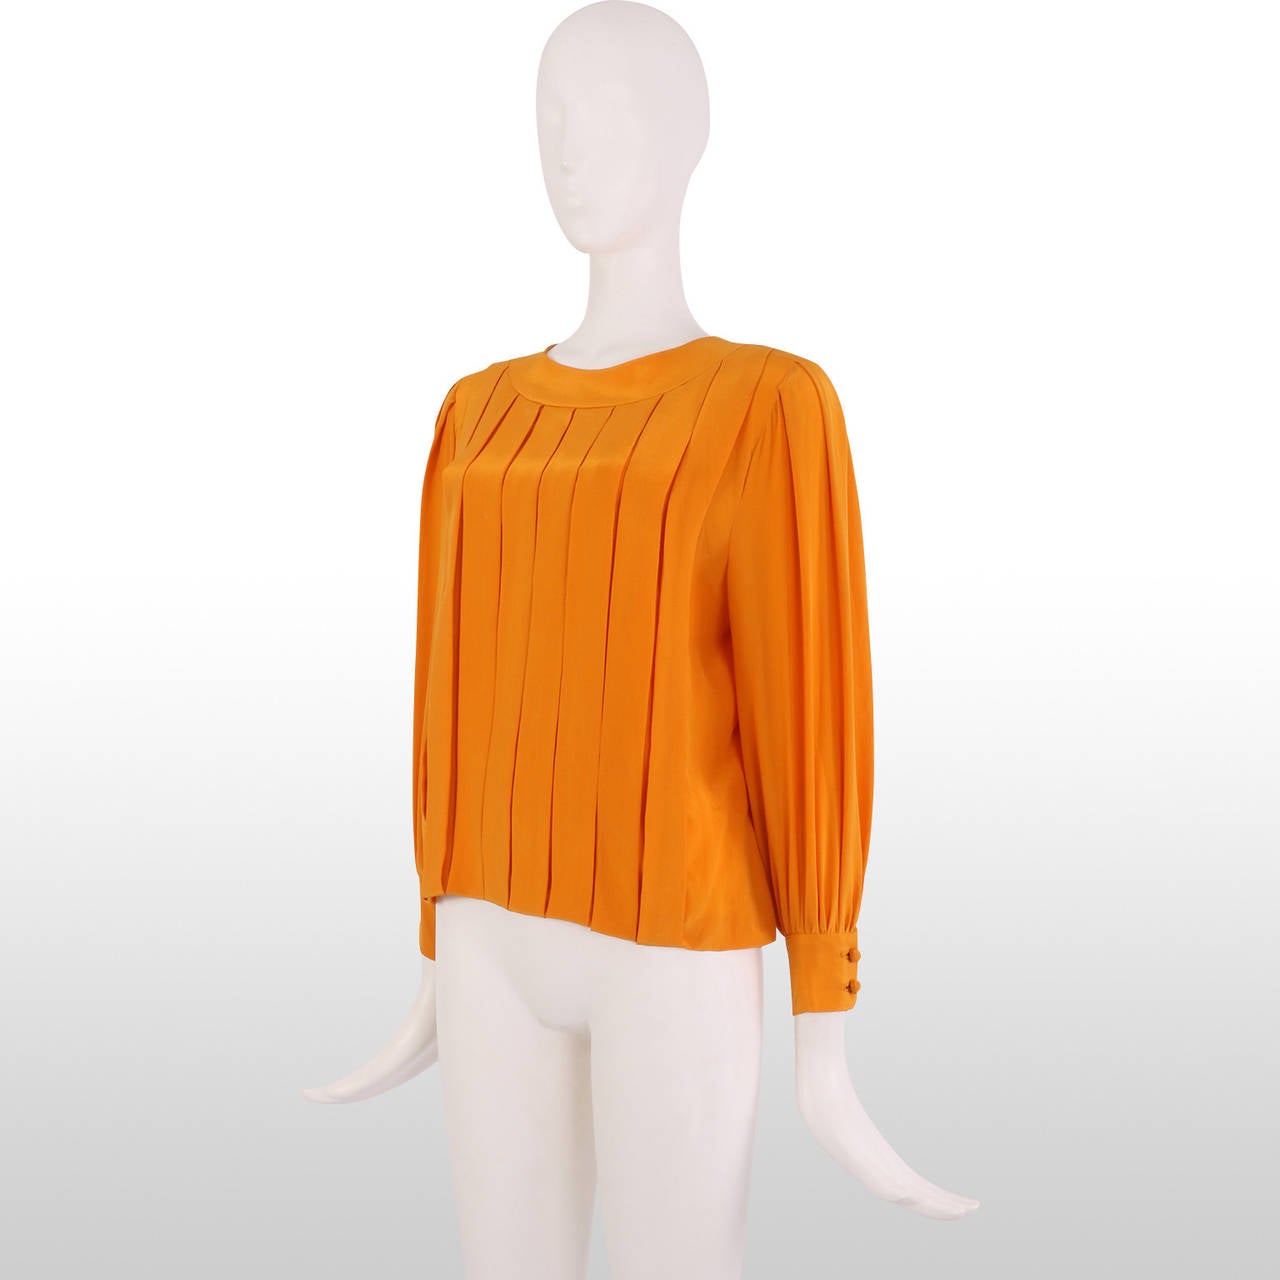 This gorgeous Hardy Amies blouse is the perfect transitional piece in the summer months whilst the sunburst orange colour allows the blouse to inject colour into your wardrobe and the beautiful pleated front adds an extra statement. The blouse